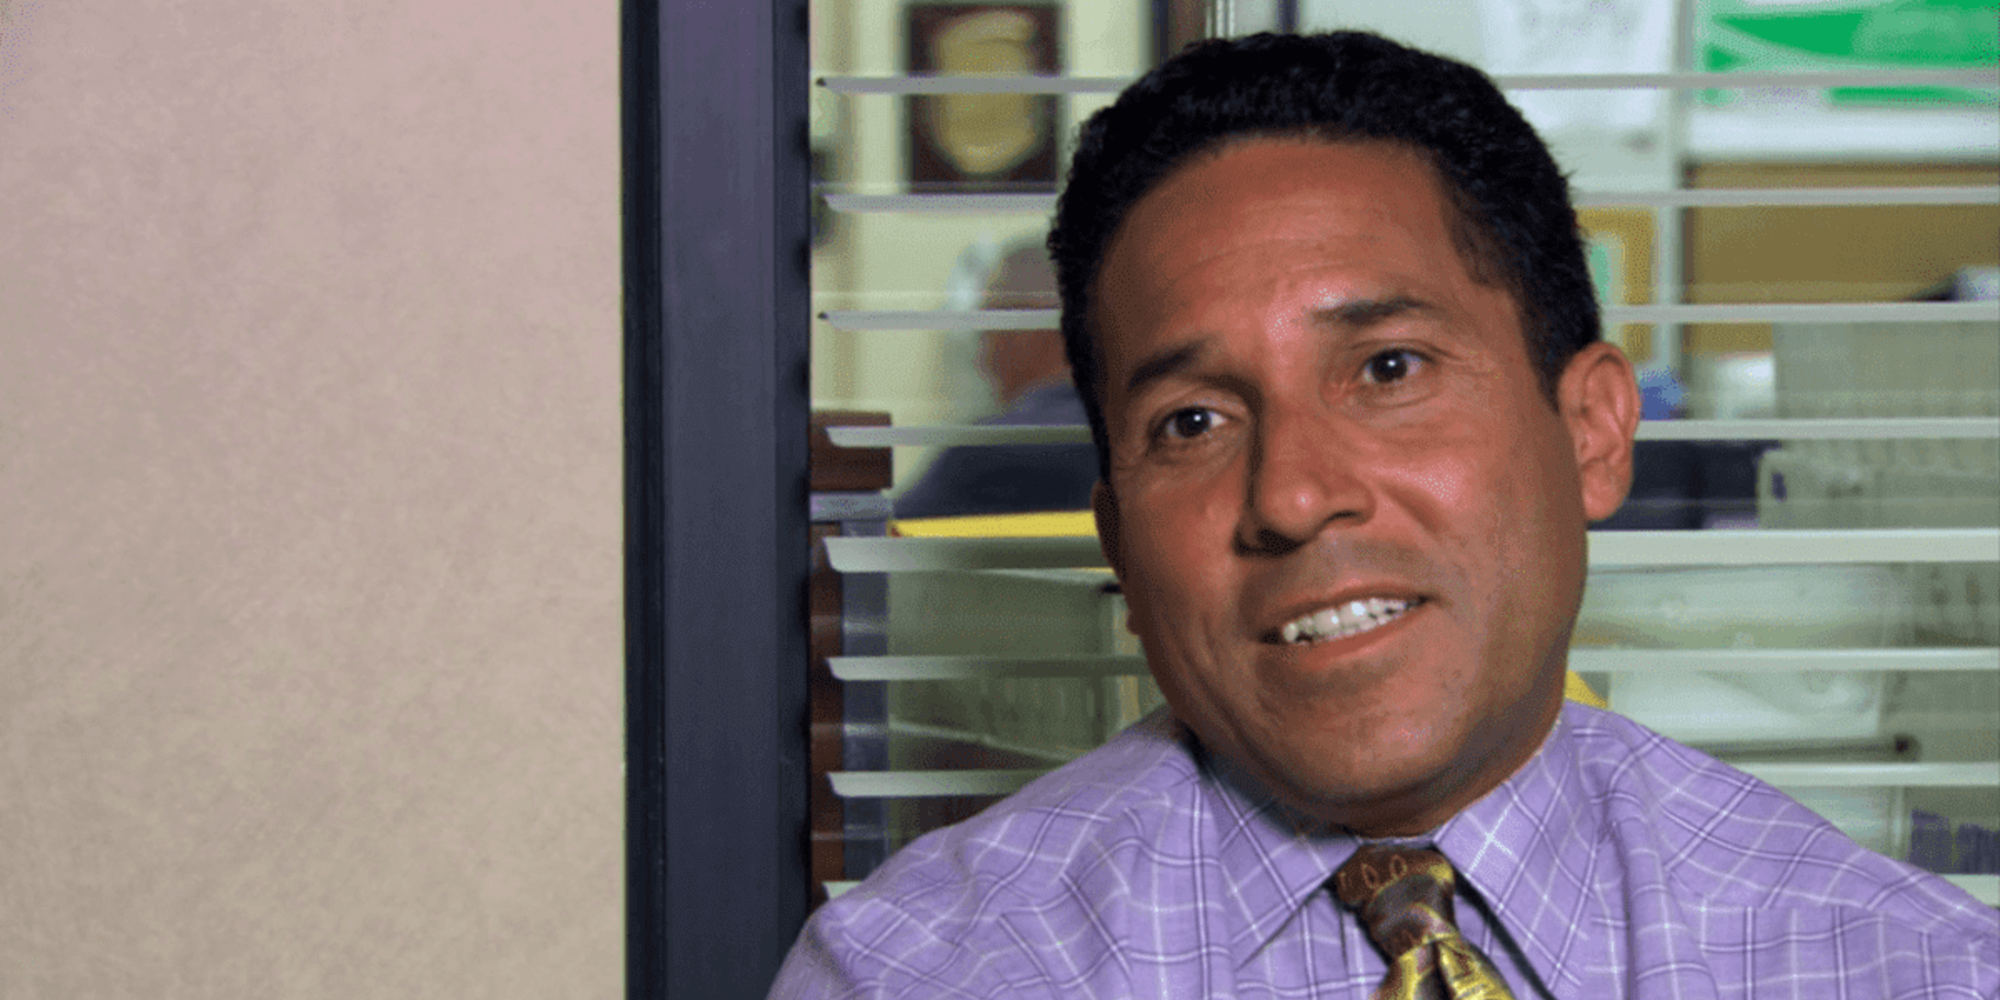 Oscar Martinez gives an awkward smile to the camera in The Office